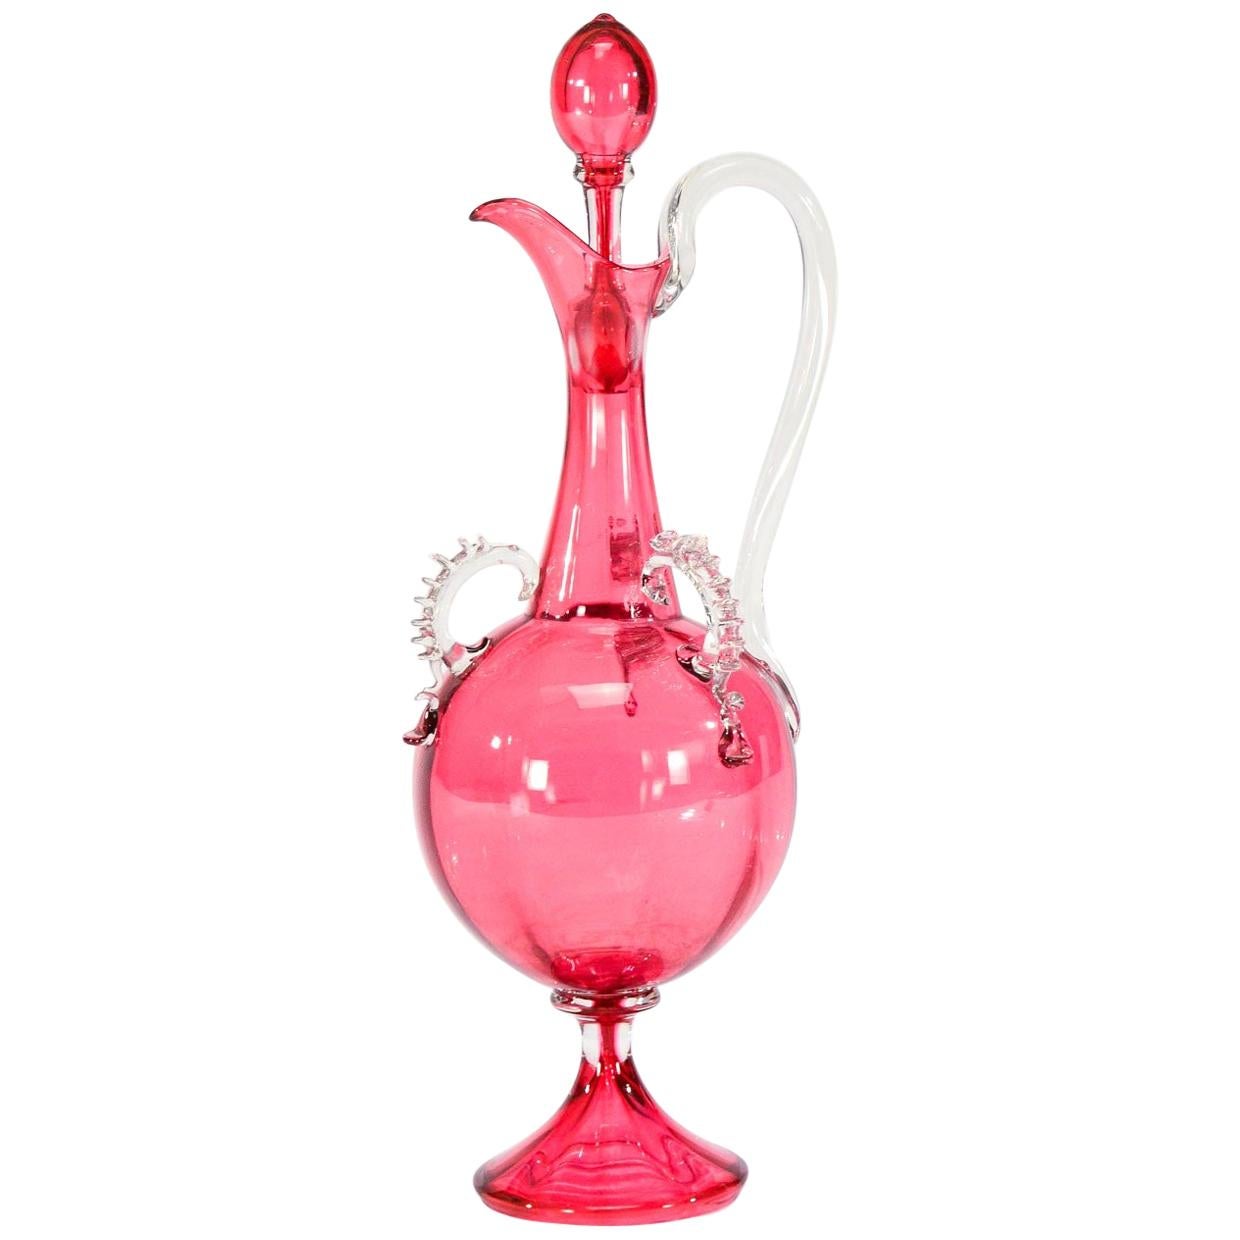 Handblown Cranberry Decanter Claret Jug with Applied Clear Handle and Rigaree For Sale